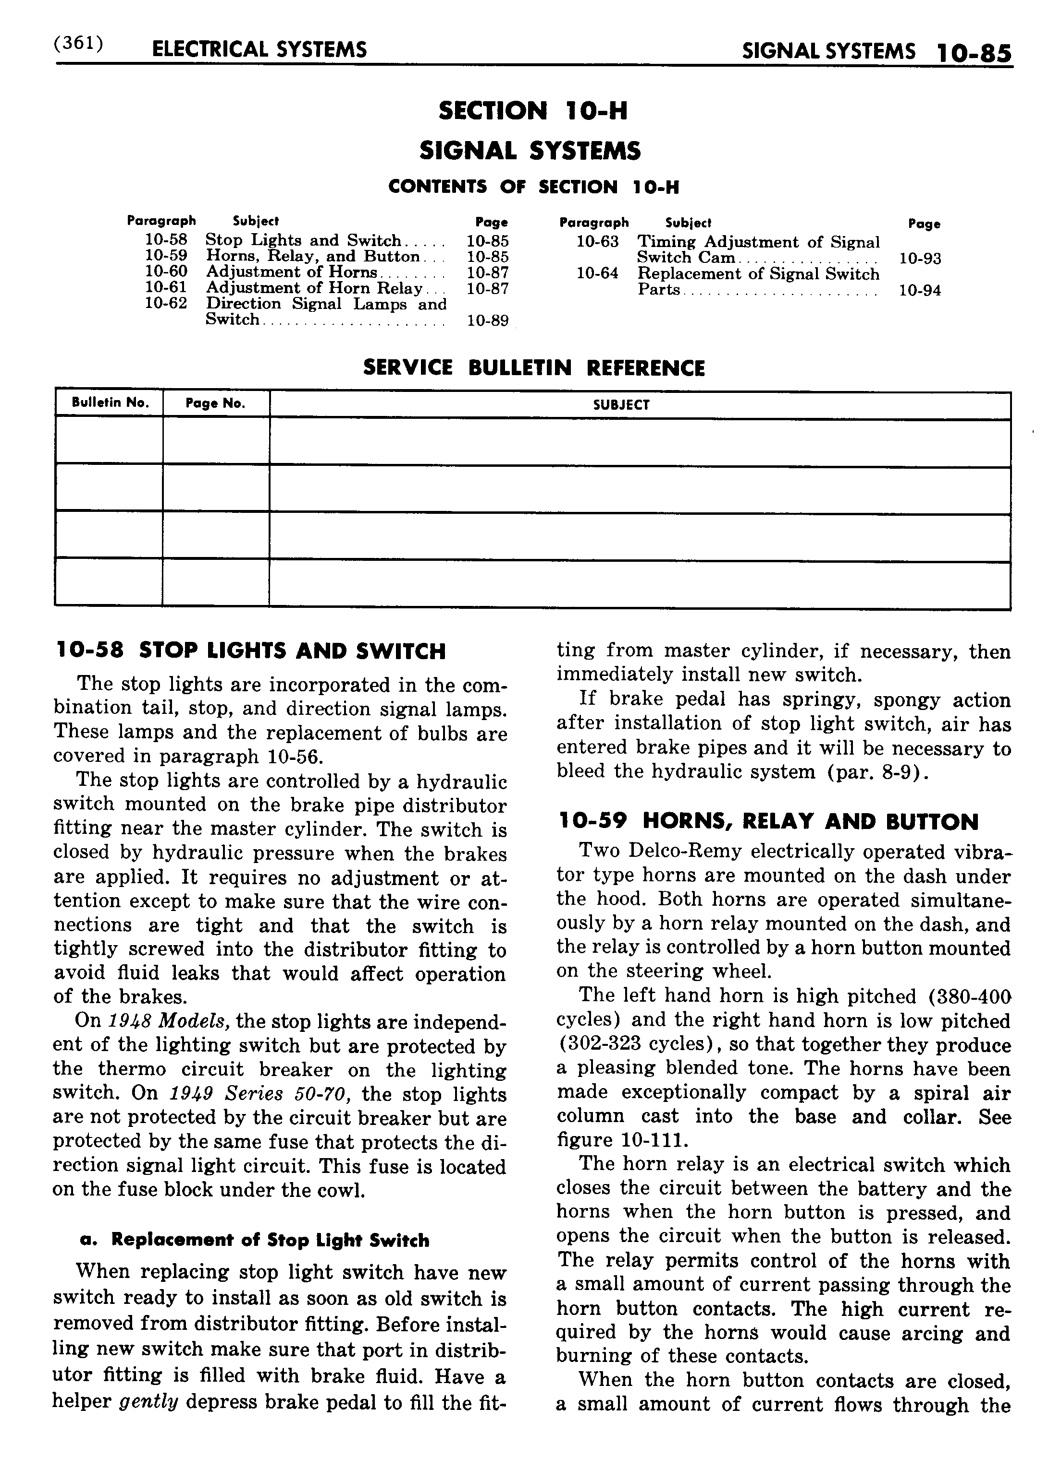 n_11 1948 Buick Shop Manual - Electrical Systems-085-085.jpg